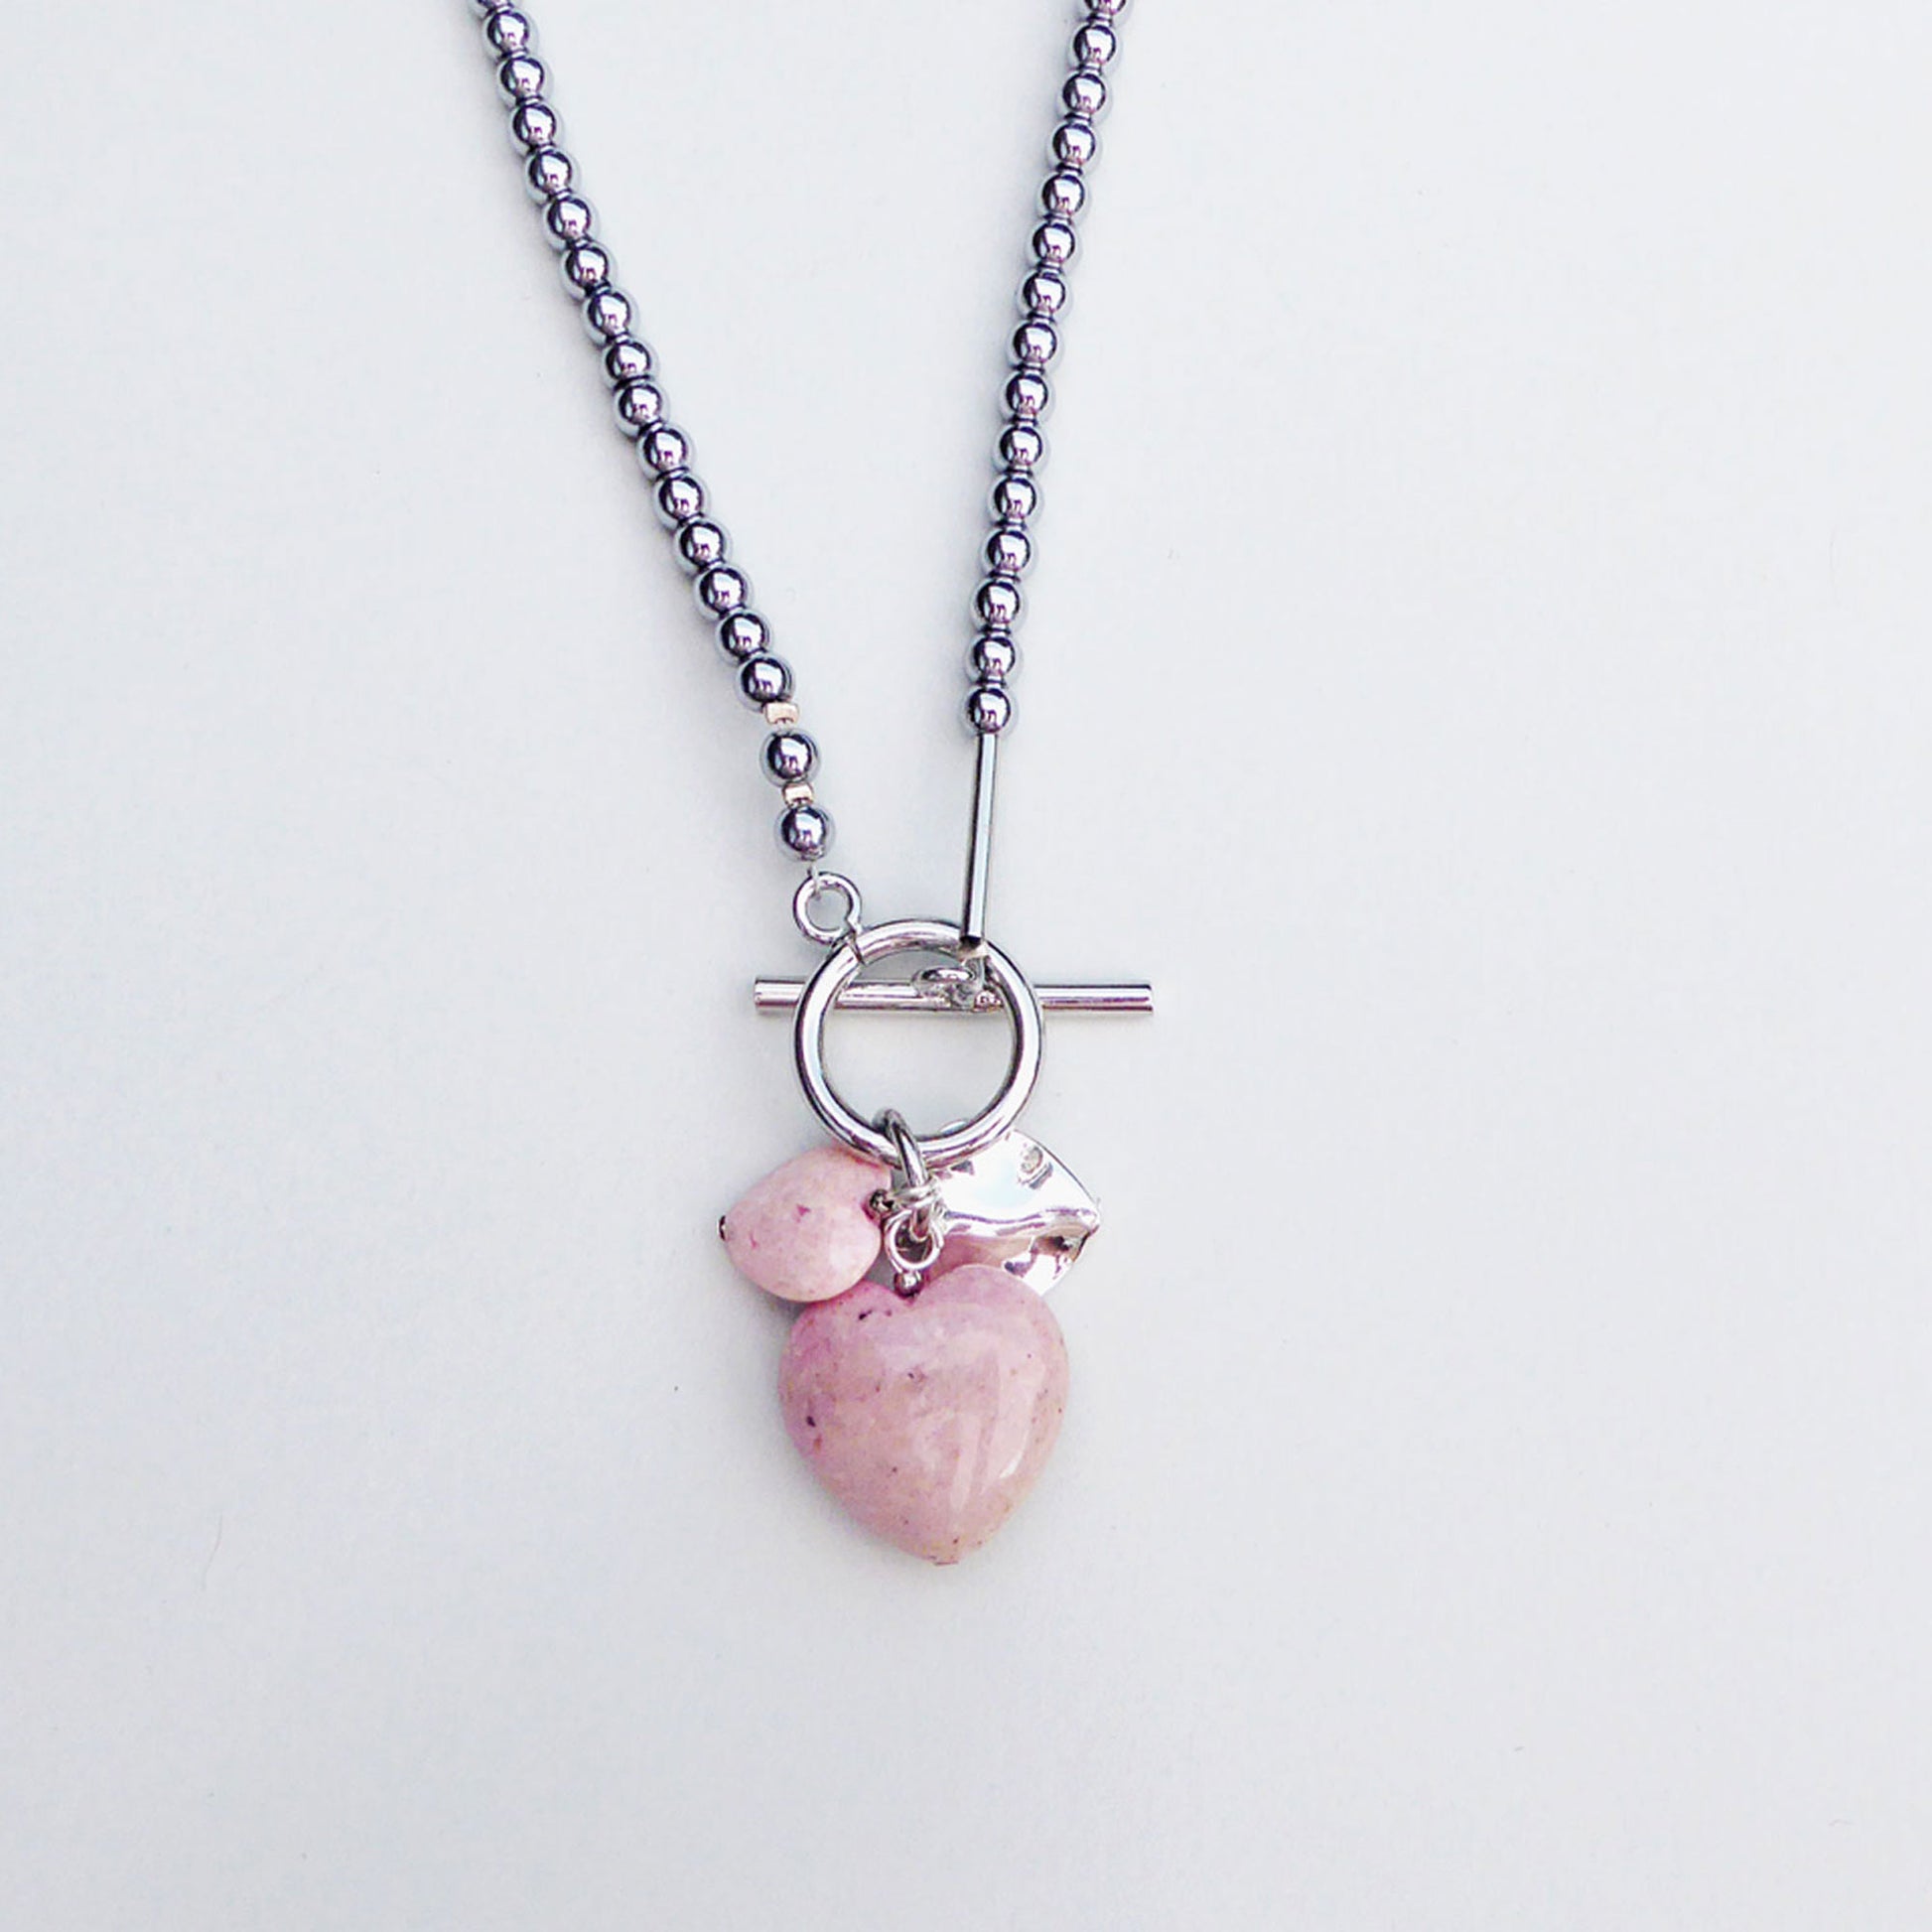 Pale pink fossil stone charms necklace